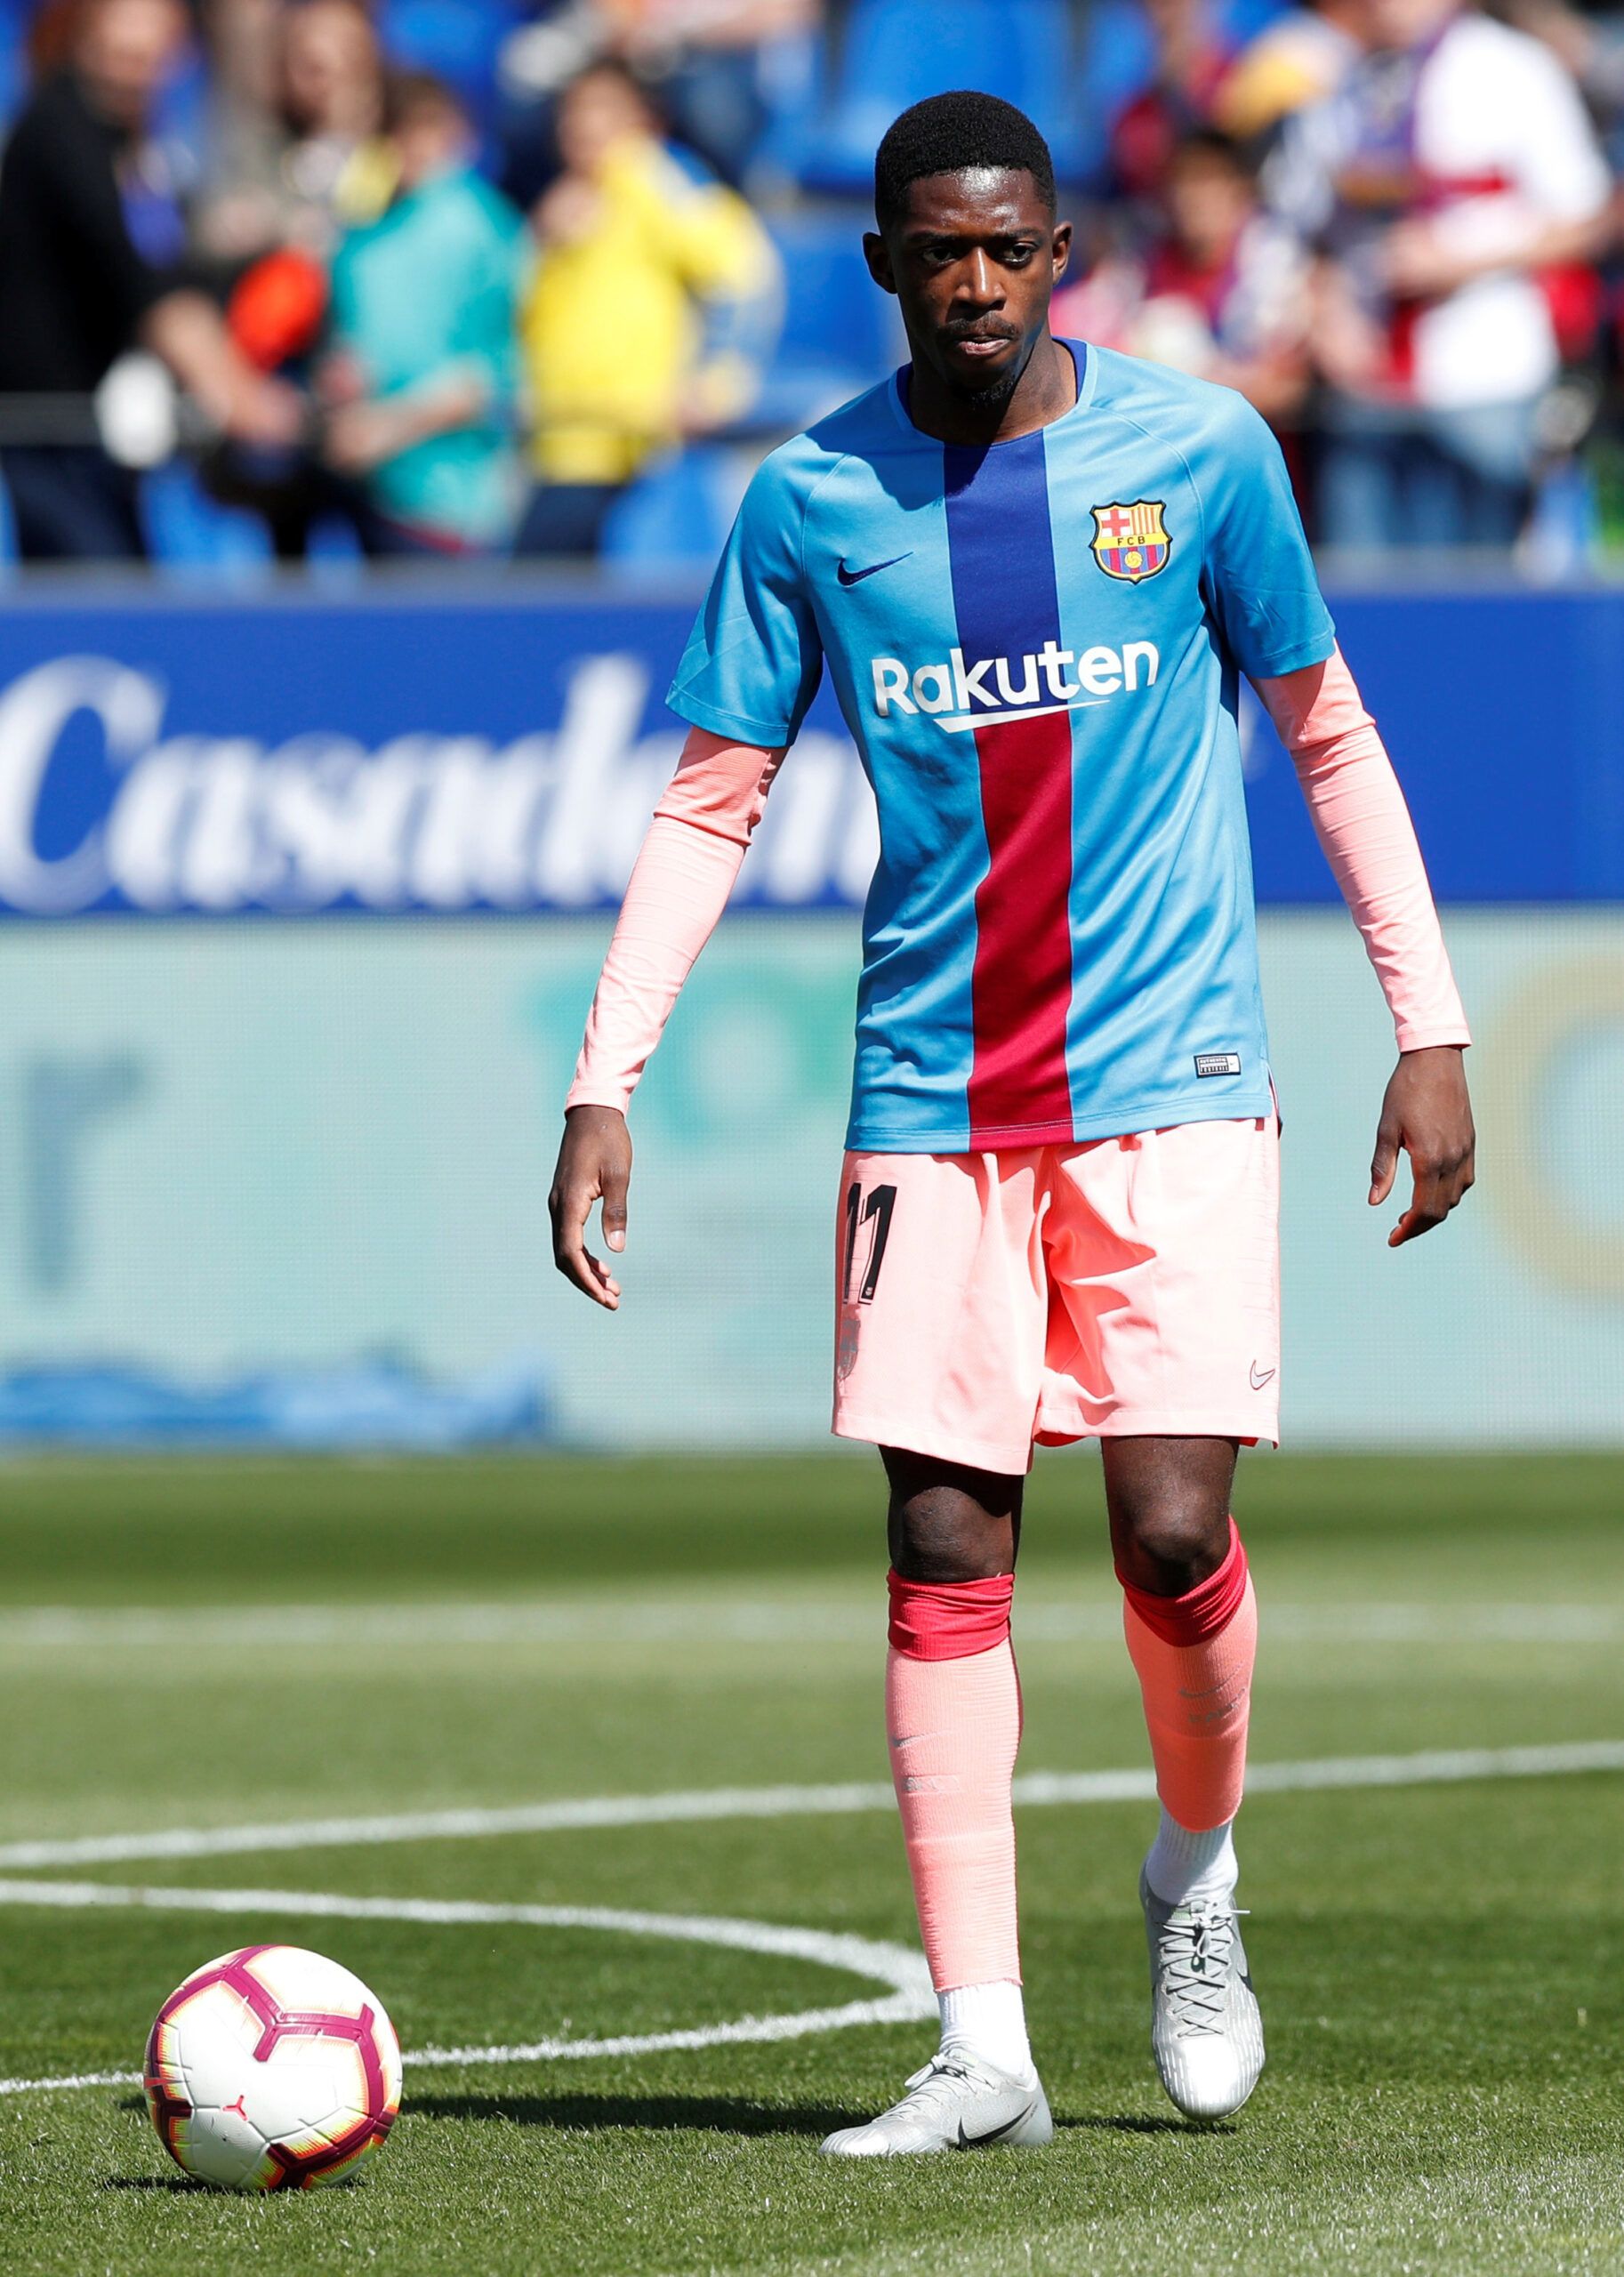 Dembele warms up for Barcelona.